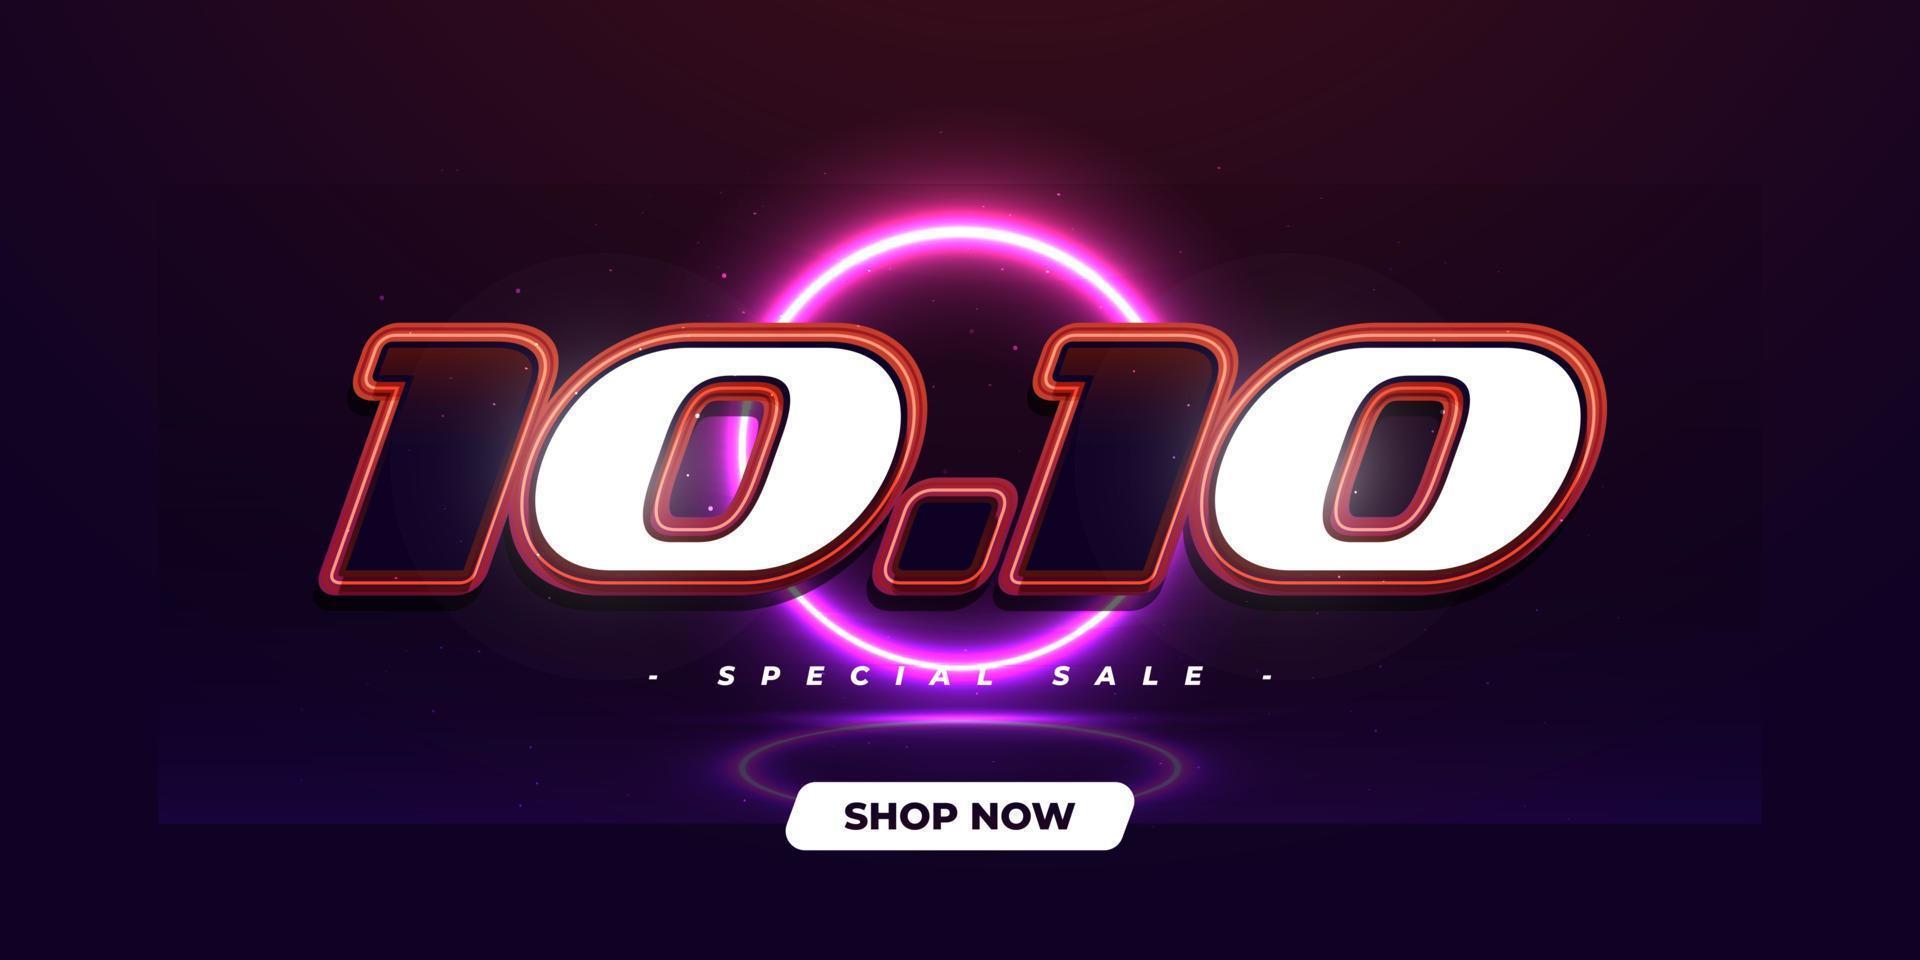 10.10 Shopping Day Poster or Banner Design with Glowing Neon on Dark Background. Sale Banner Template Design for Social Media or Website. Special Offer Sale Campaign and Promotion vector